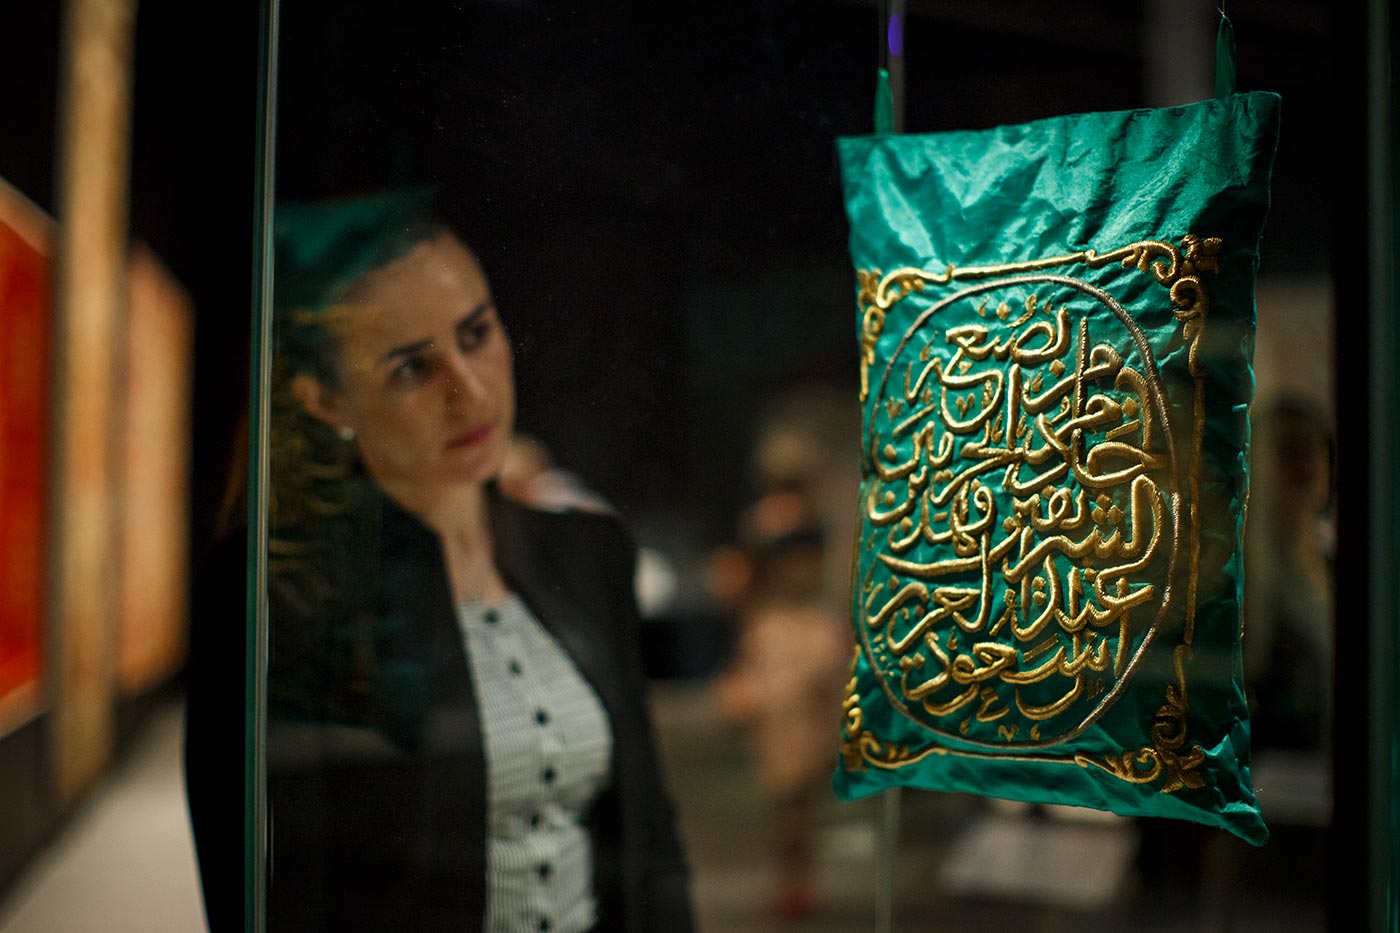 A woman looks at a green and gold object resembling a bag which hangs suspended.